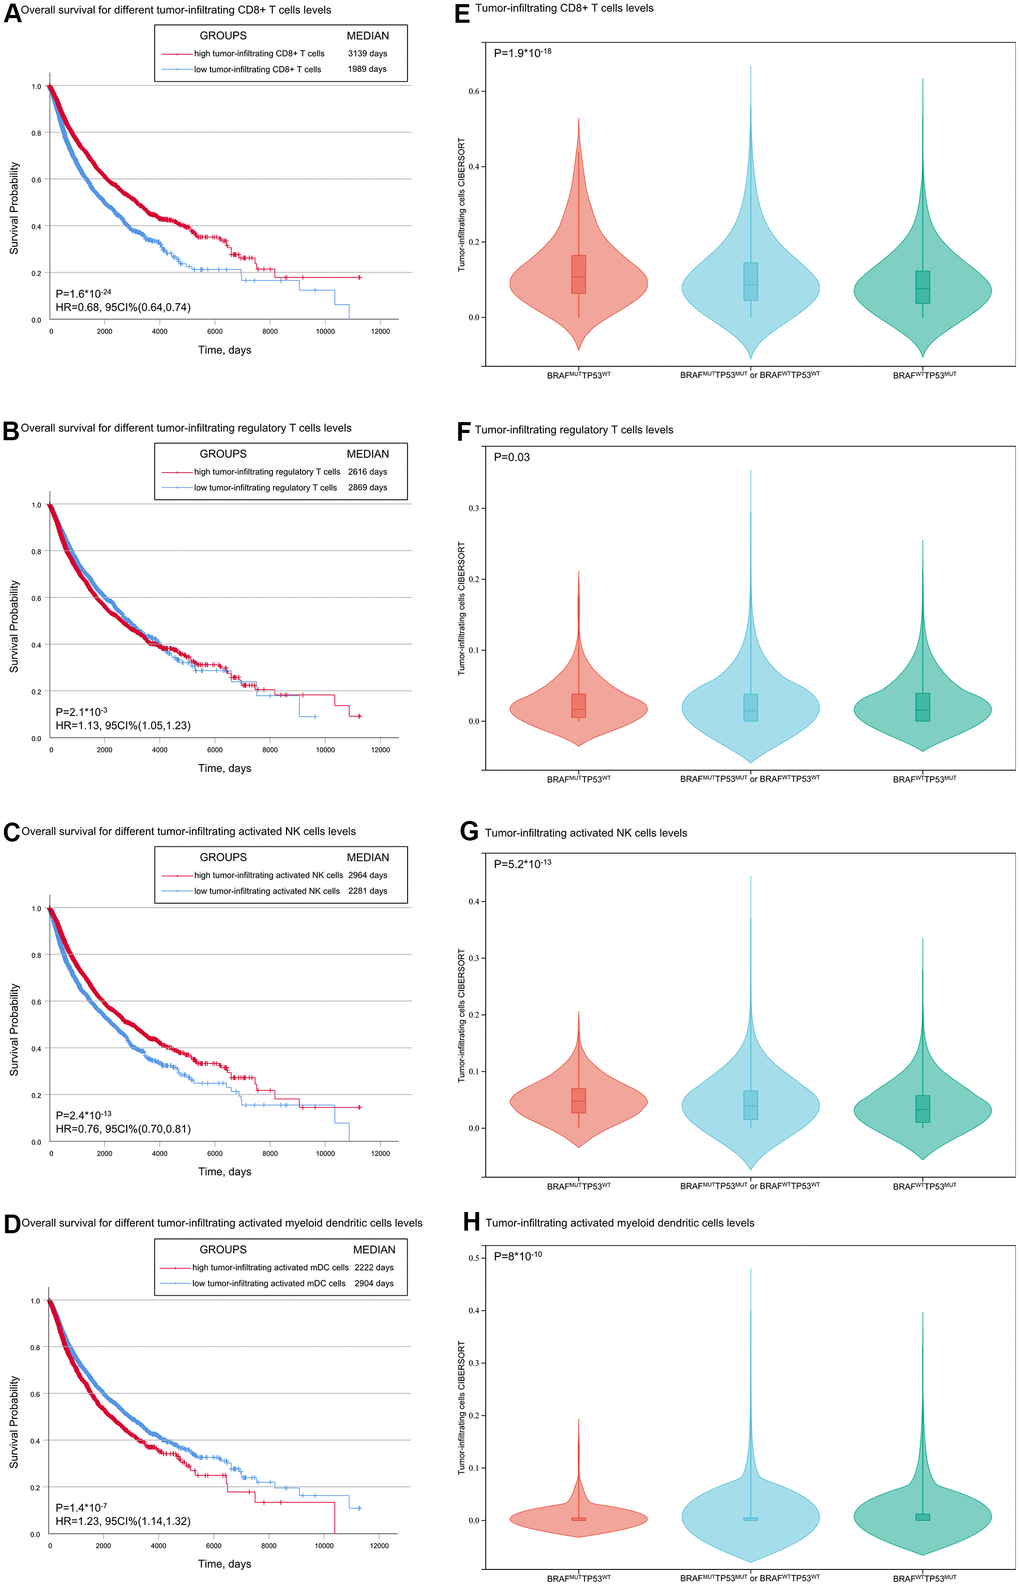 Associations of overall survival and TP53 and BRAF mutation types with tumor-infiltrating immune cells. (A, B) Patients with low tumor-infiltrating CD8+ T cells/activated NK cells had shorter OS than patients with high tumor-infiltrating CD8+ T cells/activated NK cells. (C, D) Patients with low tumor-infiltrating regulatory T cells /activated myeloid dendritic cells had shorter OS than patients with high regulatory T cells /activated myeloid dendritic cells. (E–H) The level of tumor infiltrating CD8+ T cells was correlated with the mutation of TP53/BRAF. Data was from TCGA database.